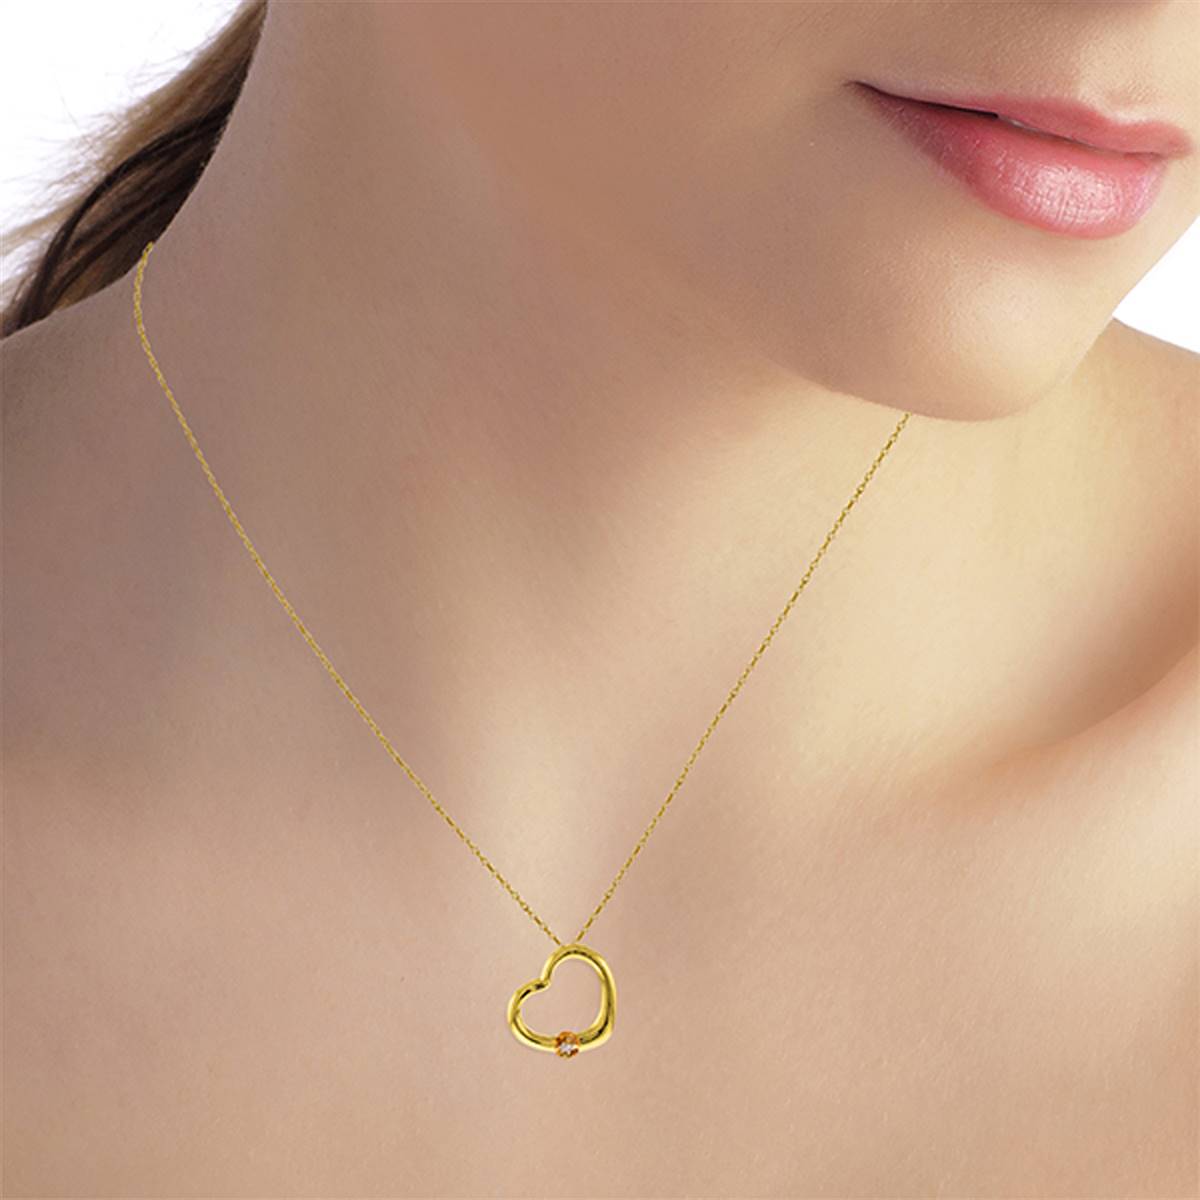 14K Solid Yellow Gold Heart Necklace w/ Natural Citrine